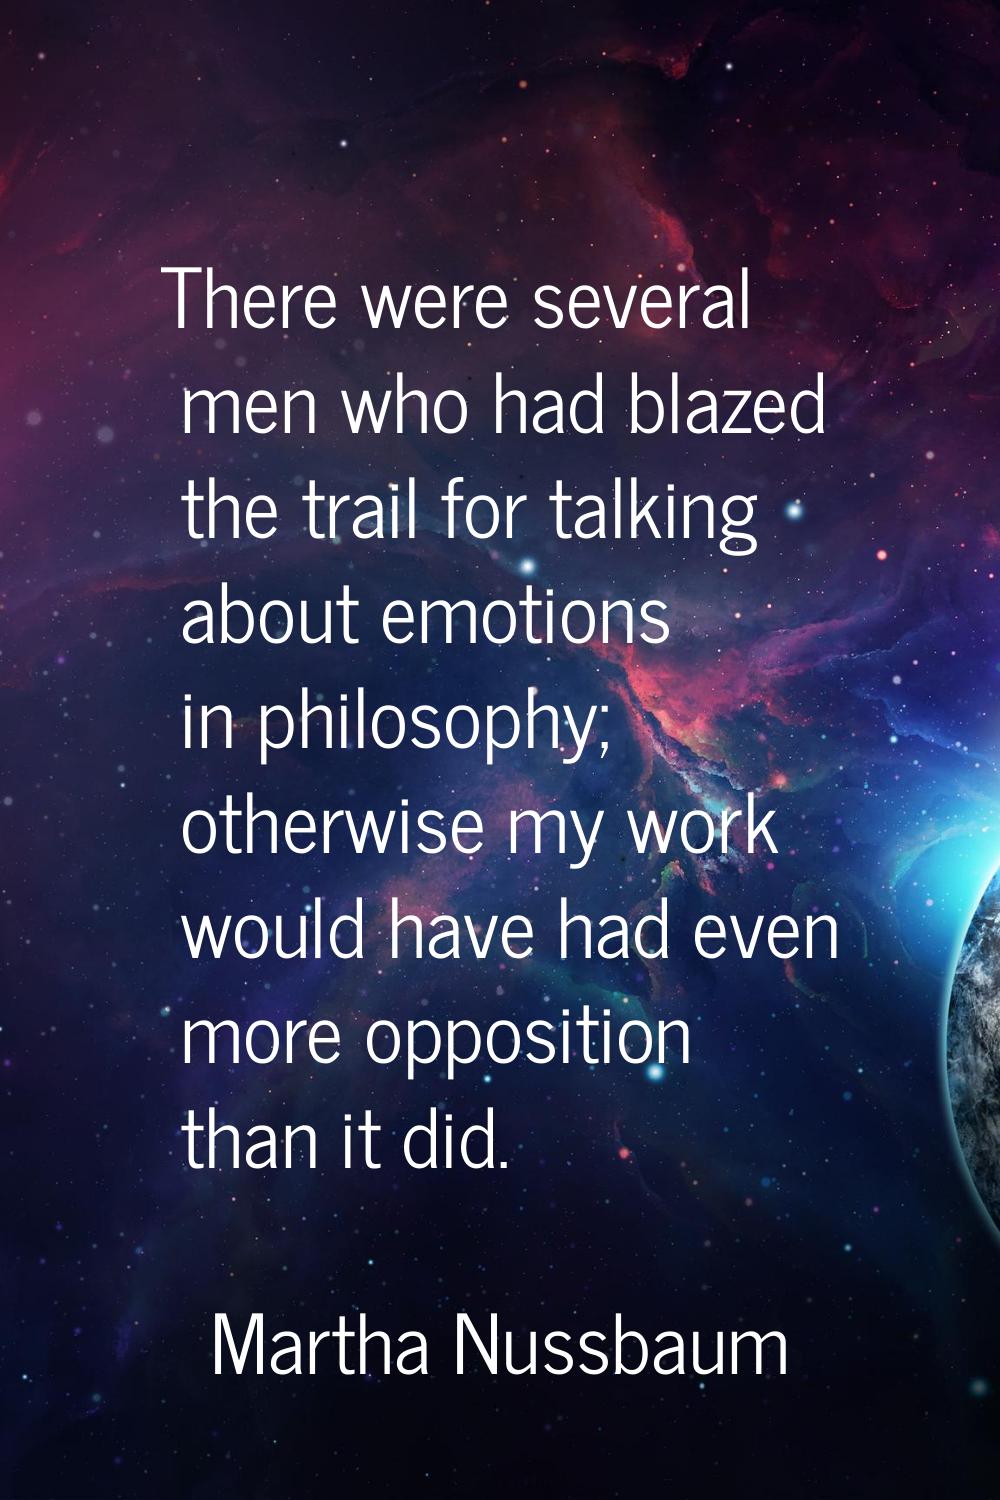 There were several men who had blazed the trail for talking about emotions in philosophy; otherwise